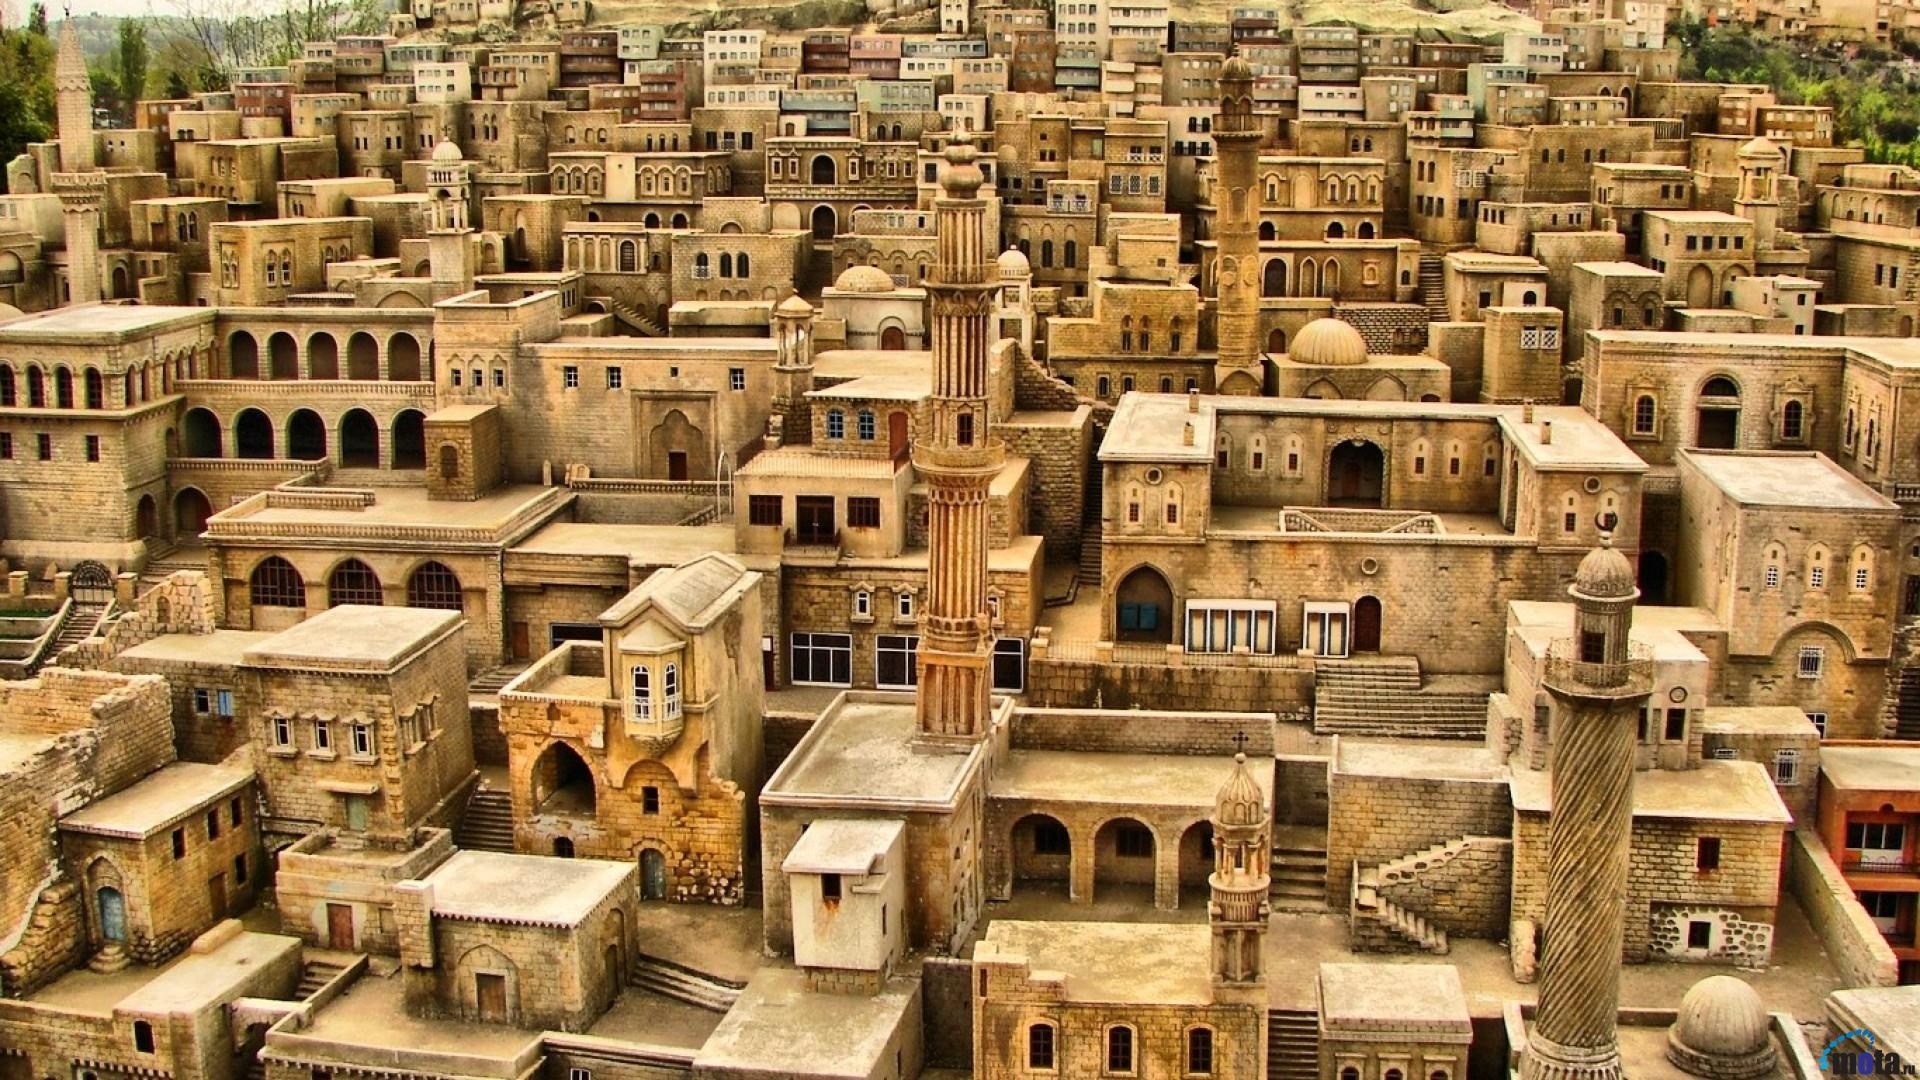 Yemen wallpapers, Historical architecture, Cultural heritage, Ancient cities, 1920x1080 Full HD Desktop